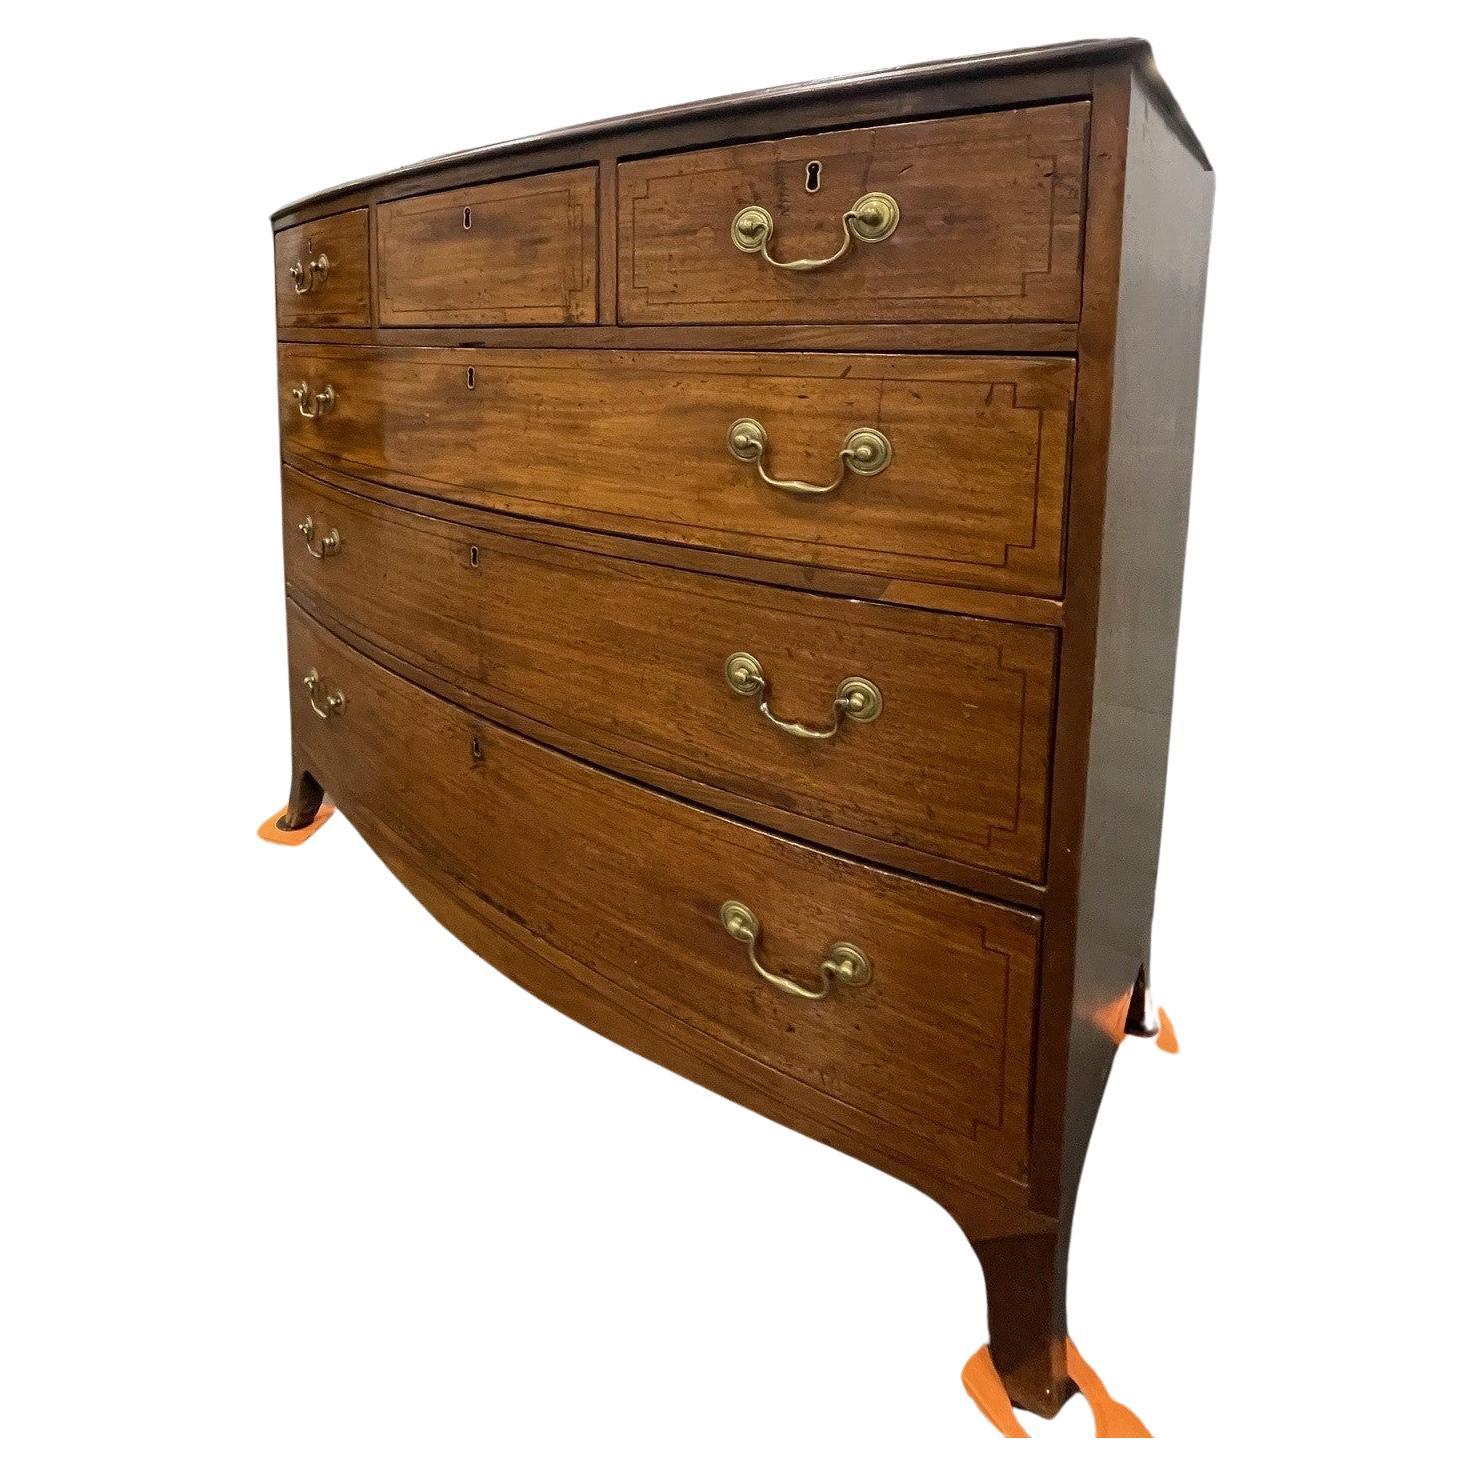 An exceptional quality Georgian Bow Front chest of drawers. With bracket feet and absolutely awesome patina and with original key. This is a unique and rare find, the drawer configuration is hard to come by Three short over three long with inlay